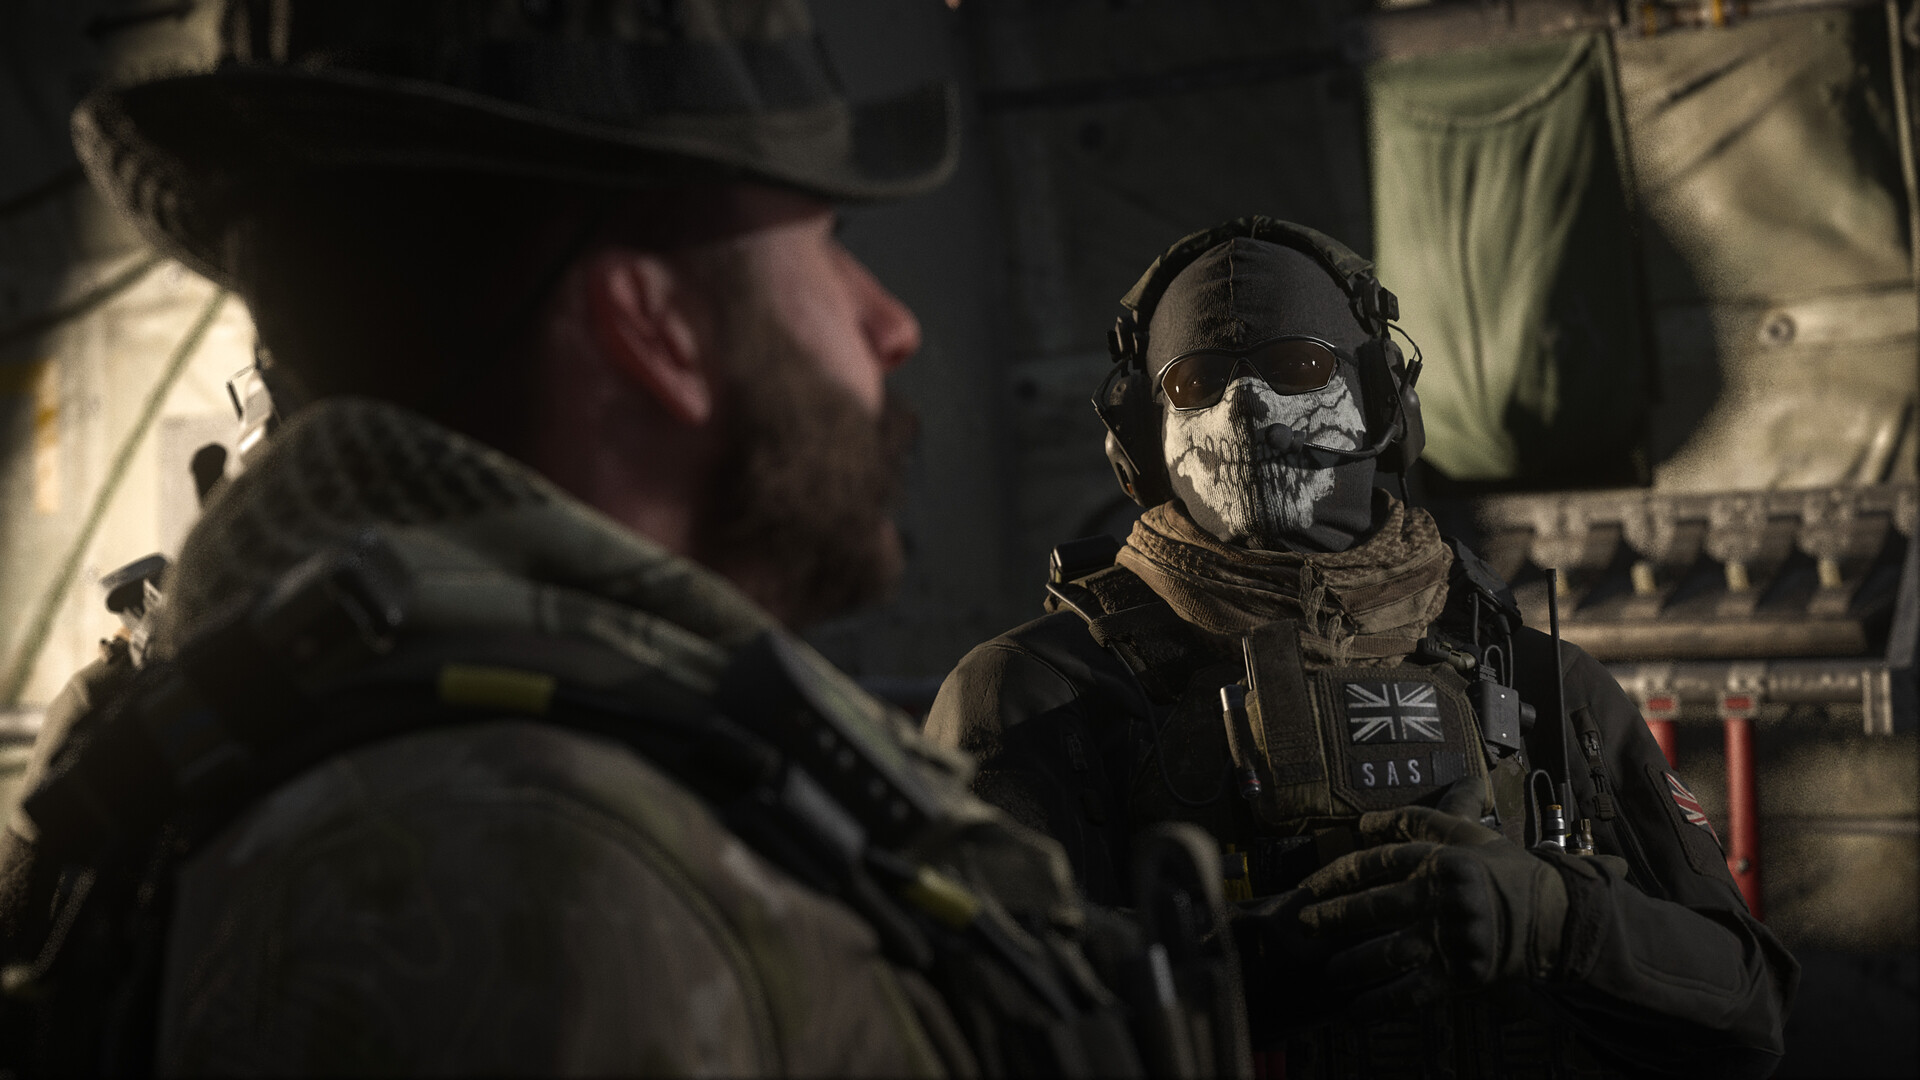 MW3 Crossplay: Join the Battle Across PS5, PS4, Xbox, and PC